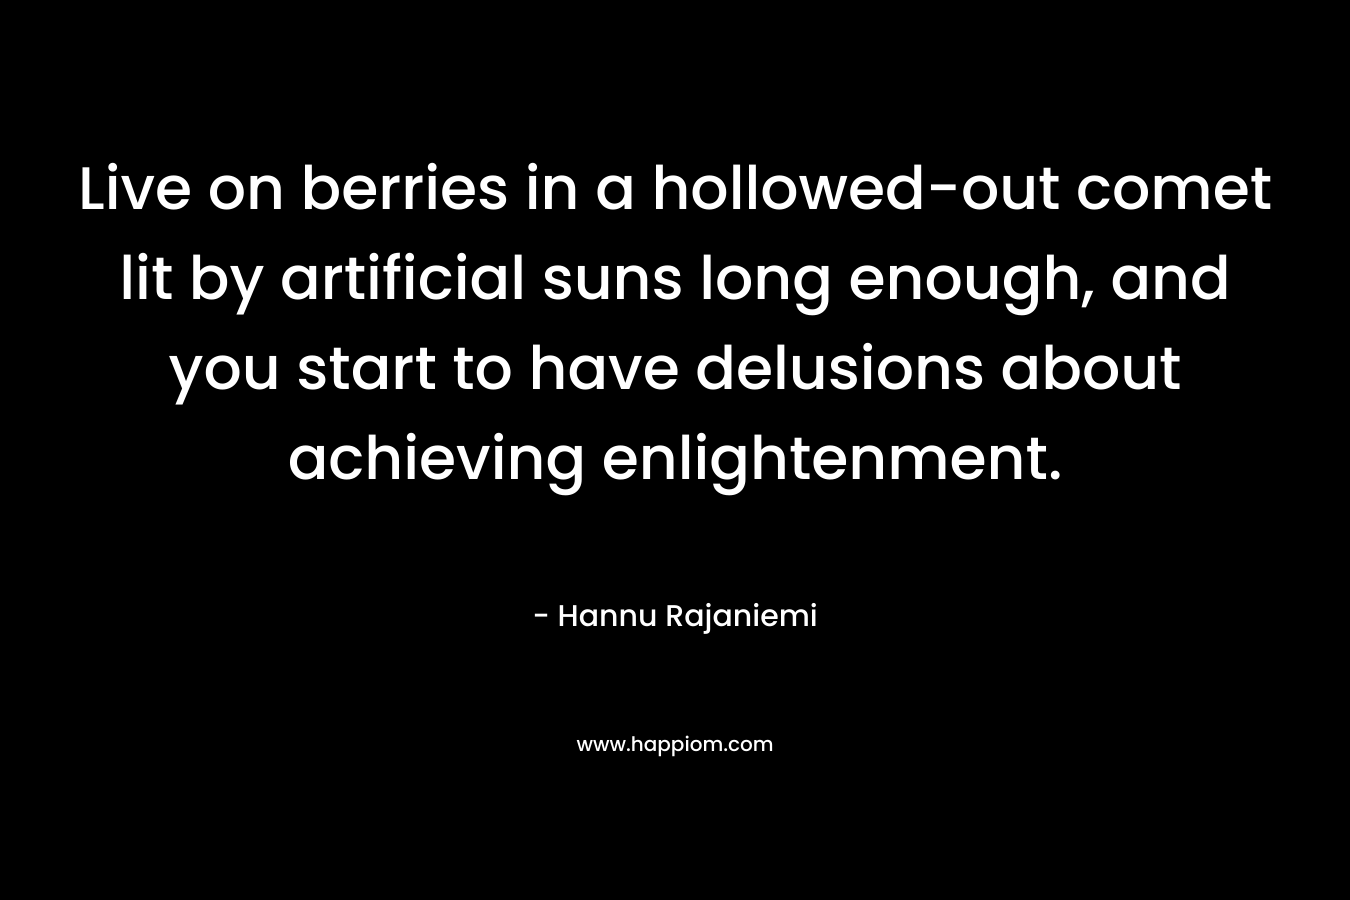 Live on berries in a hollowed-out comet lit by artificial suns long enough, and you start to have delusions about achieving enlightenment.